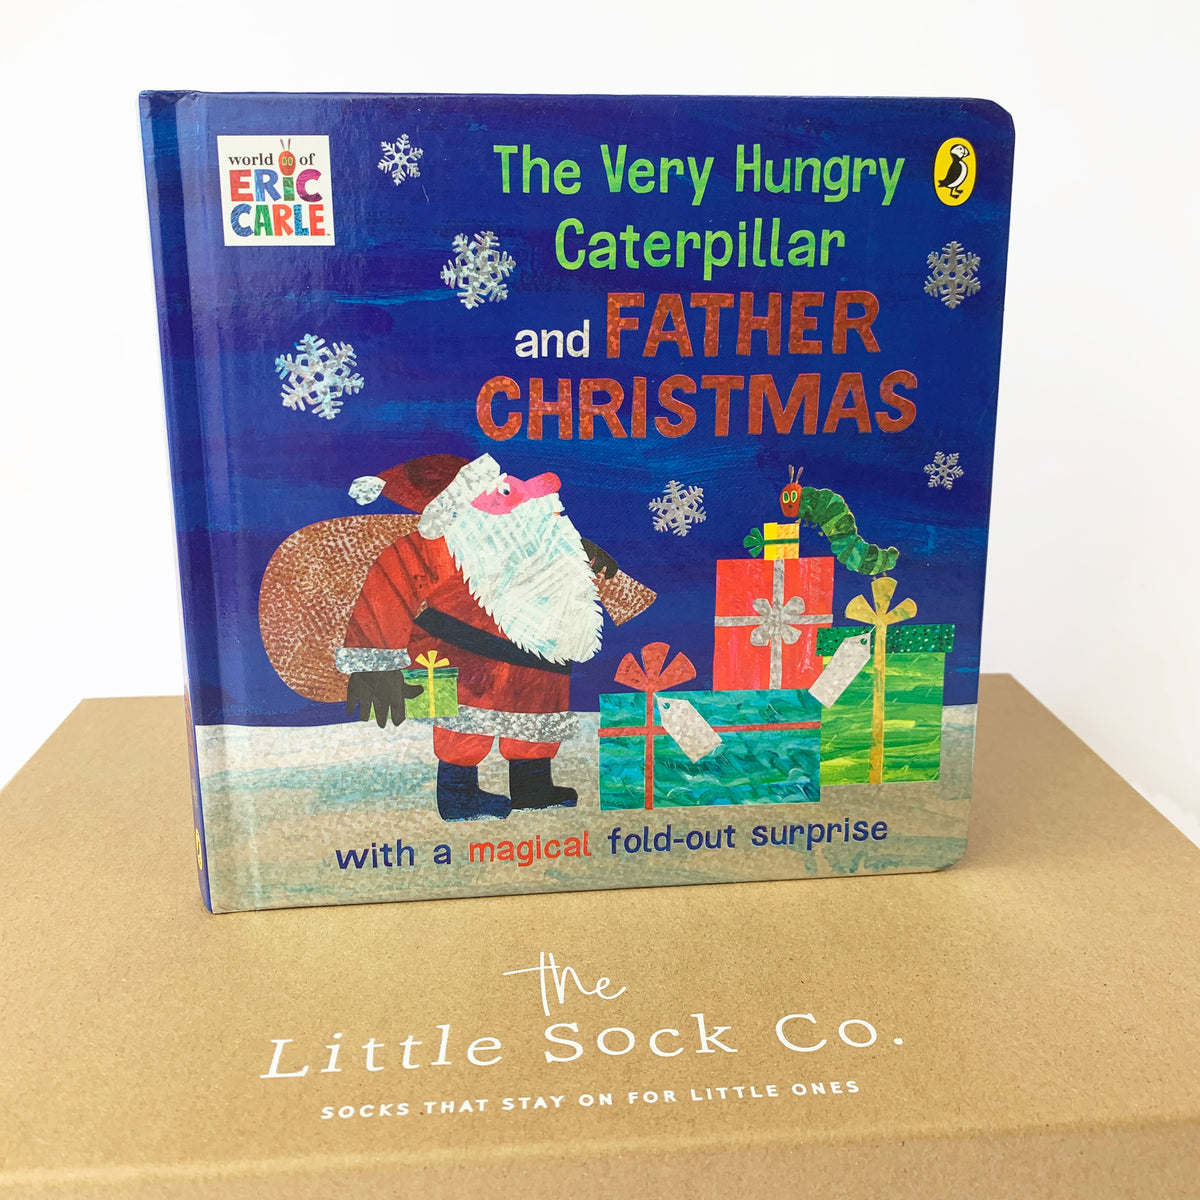 The Very Hungry Caterpillar Christmas Gift Set for baby